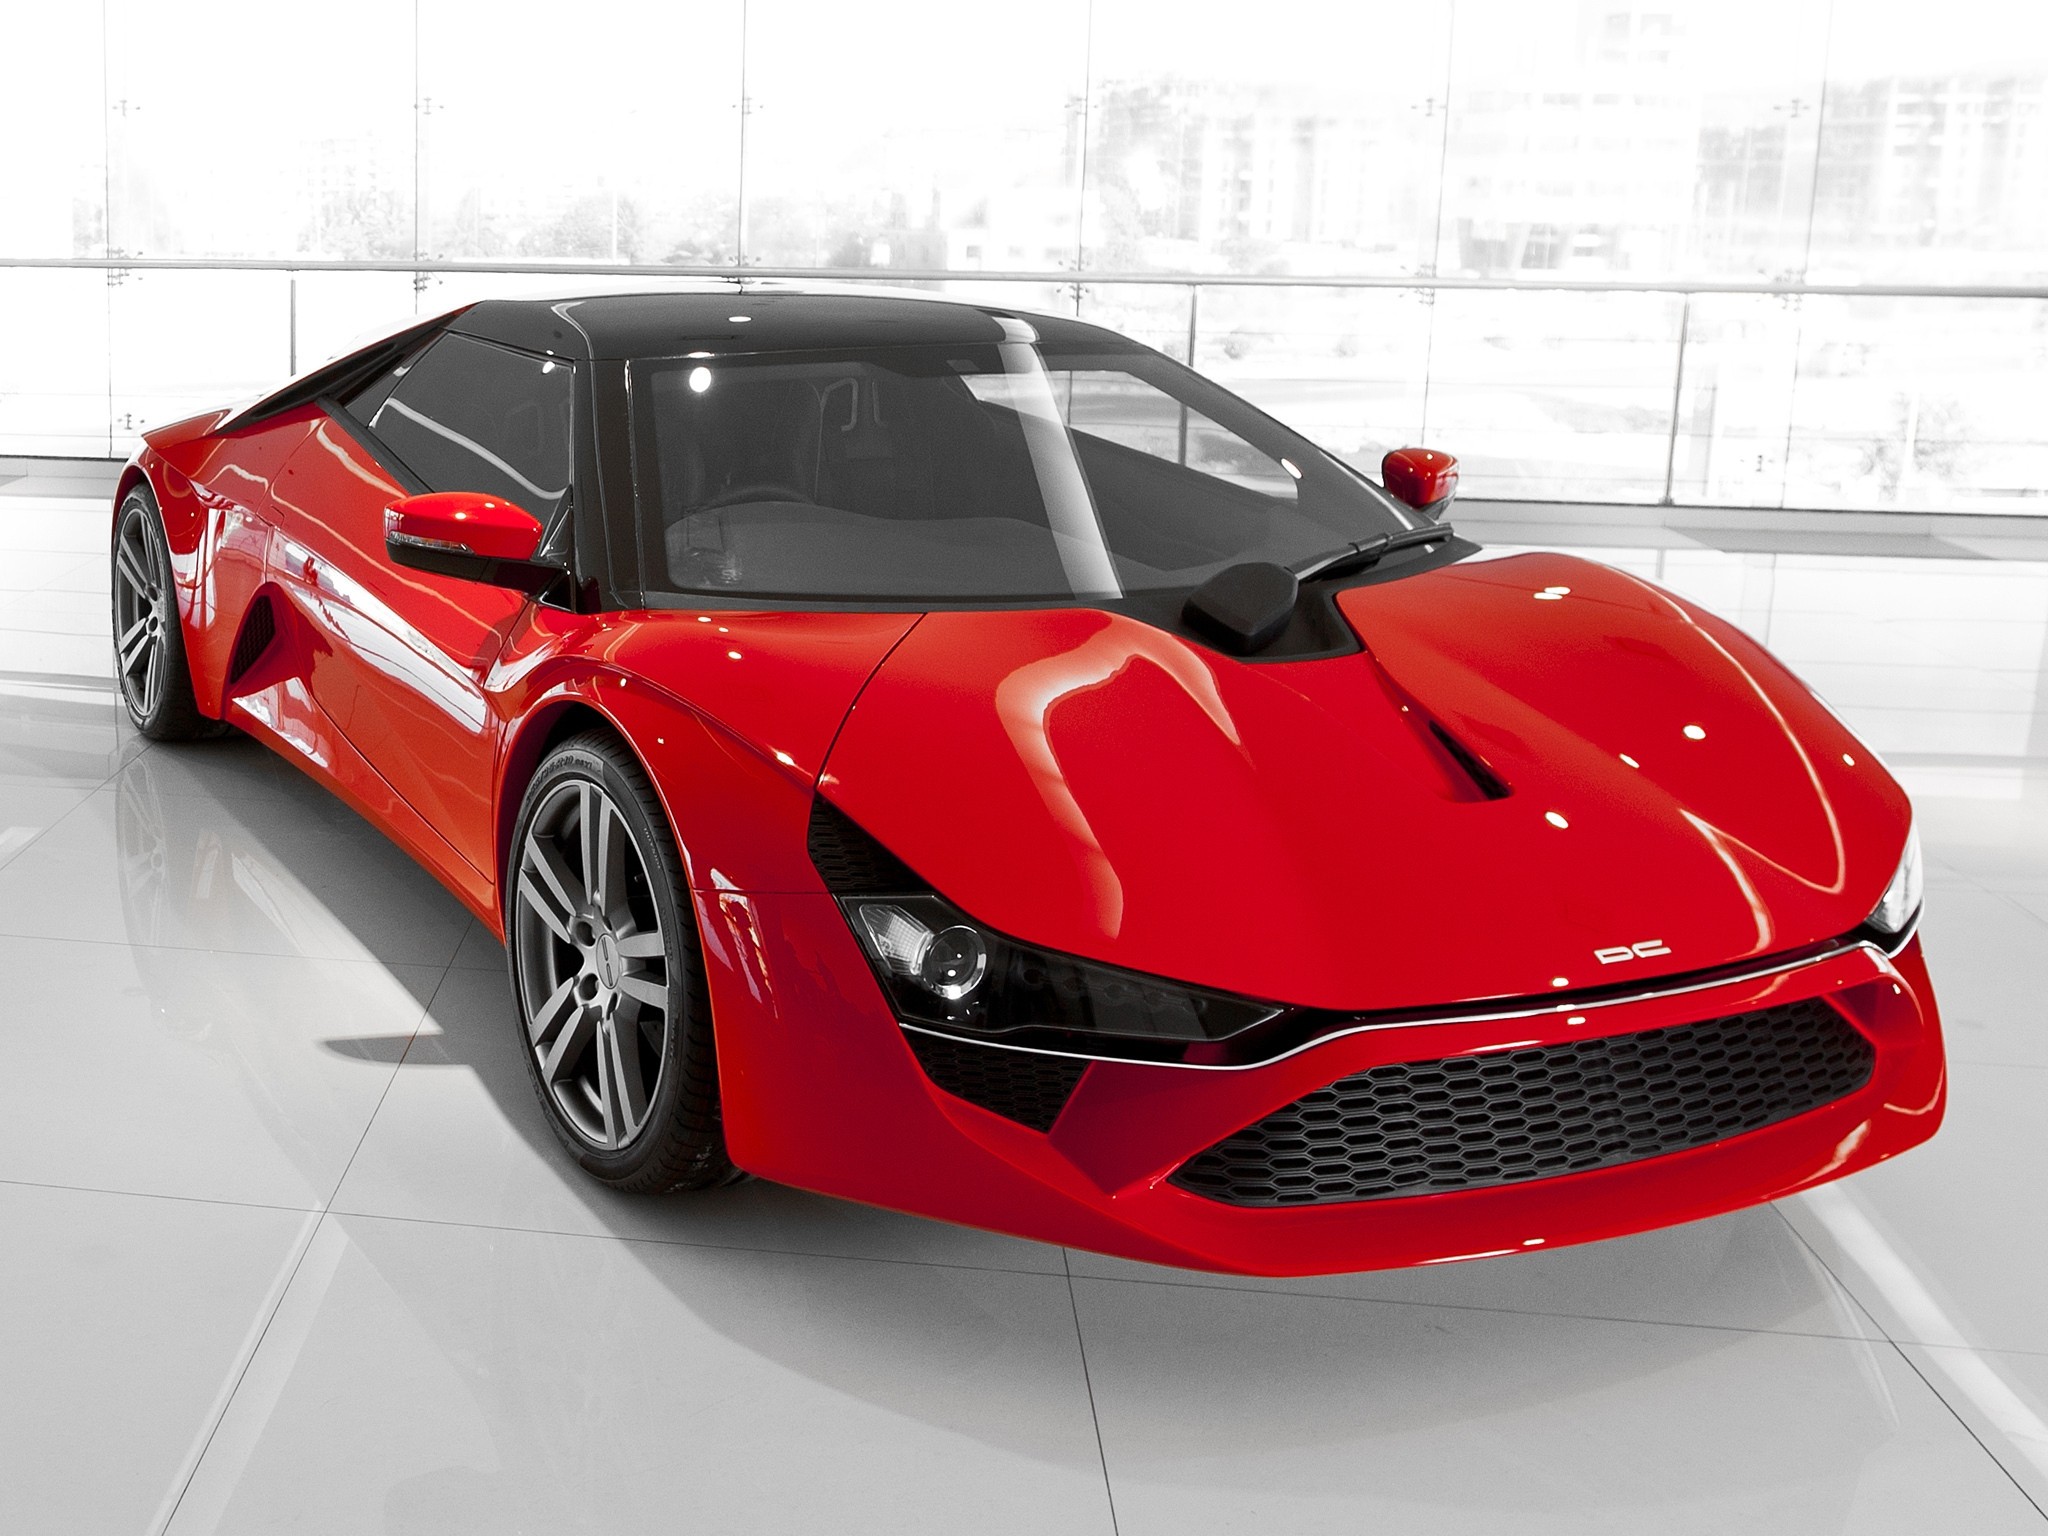 Cool Wallpapers cars, auto, red, front view, supercar, avanti